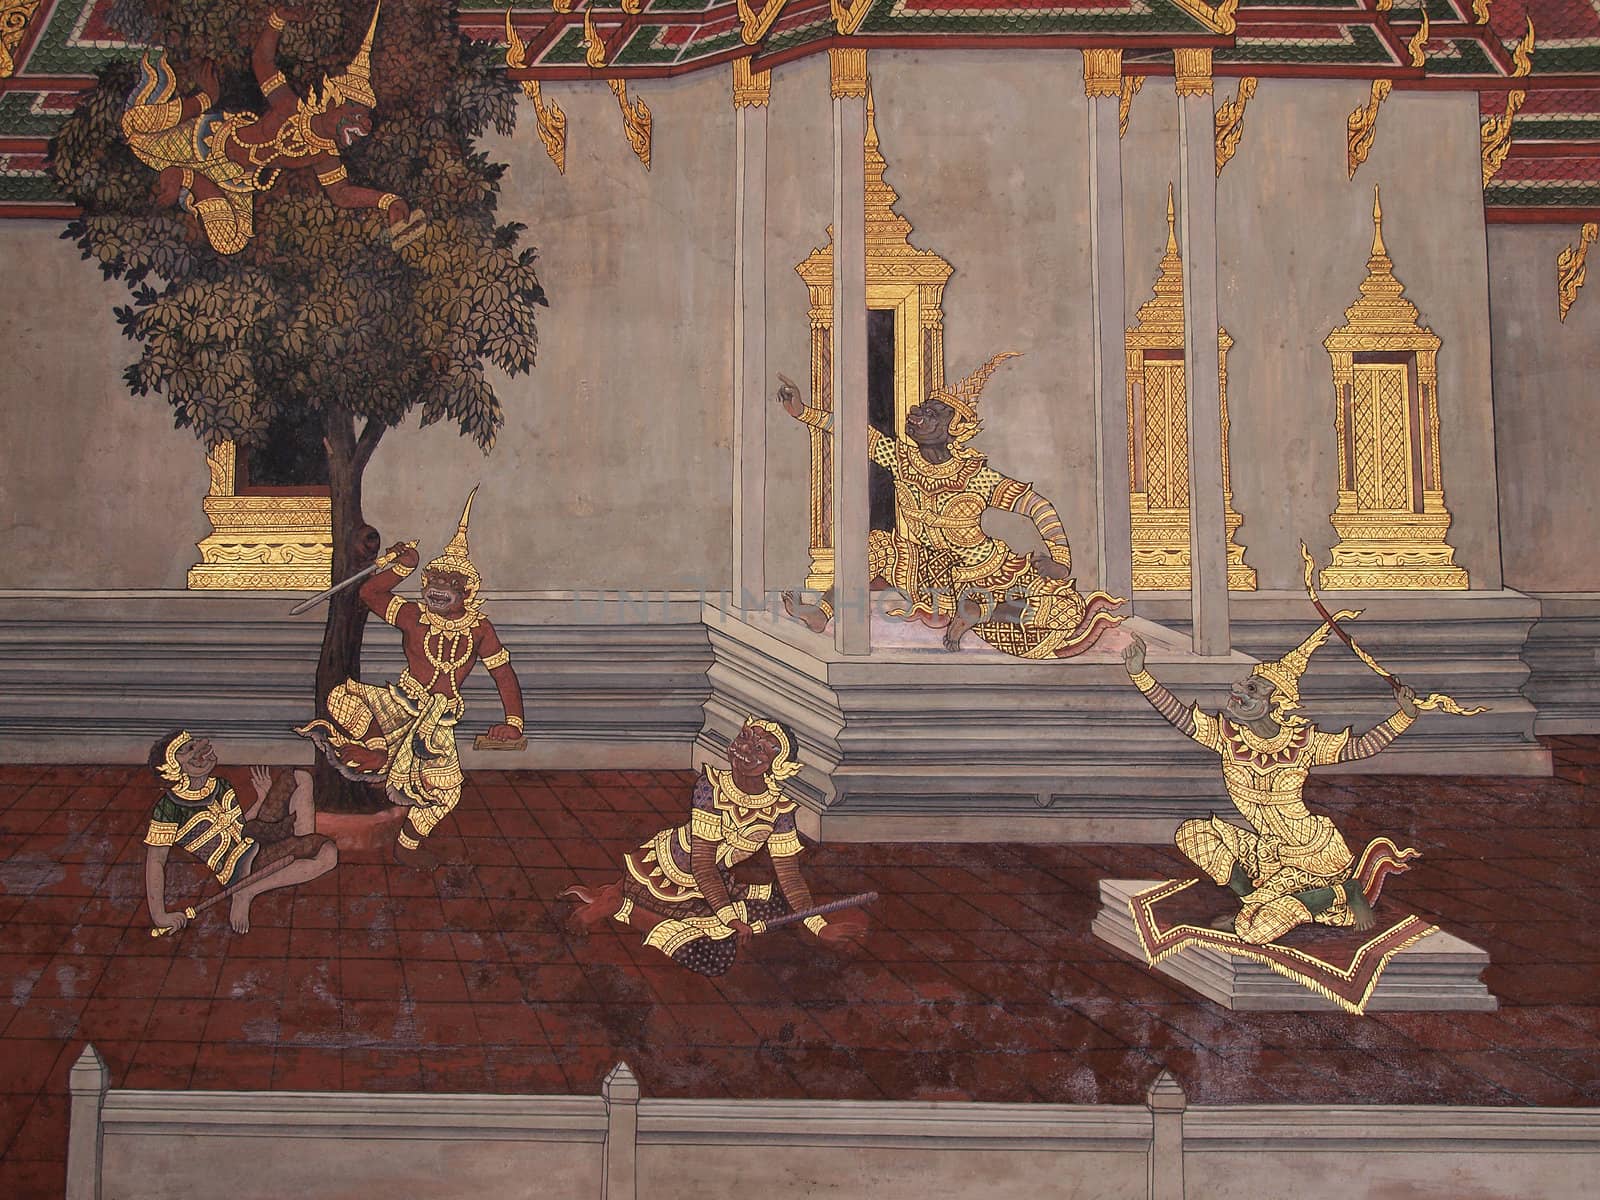 Wall art painting in temple Thailand. painting about Ramayana epic story.